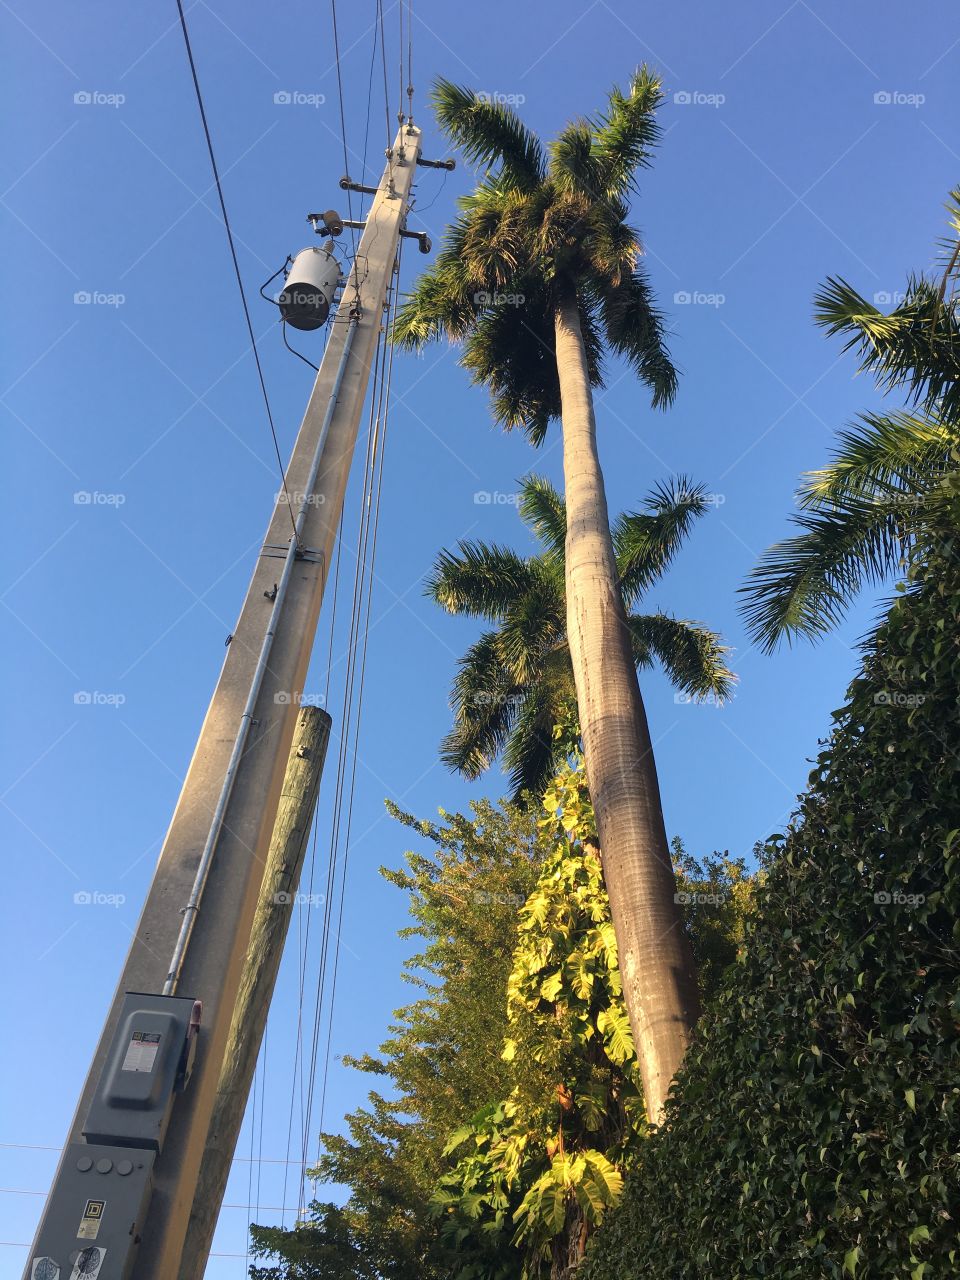 A palm tree competes with a nearby power pole for height in a tropical urban neighborhood